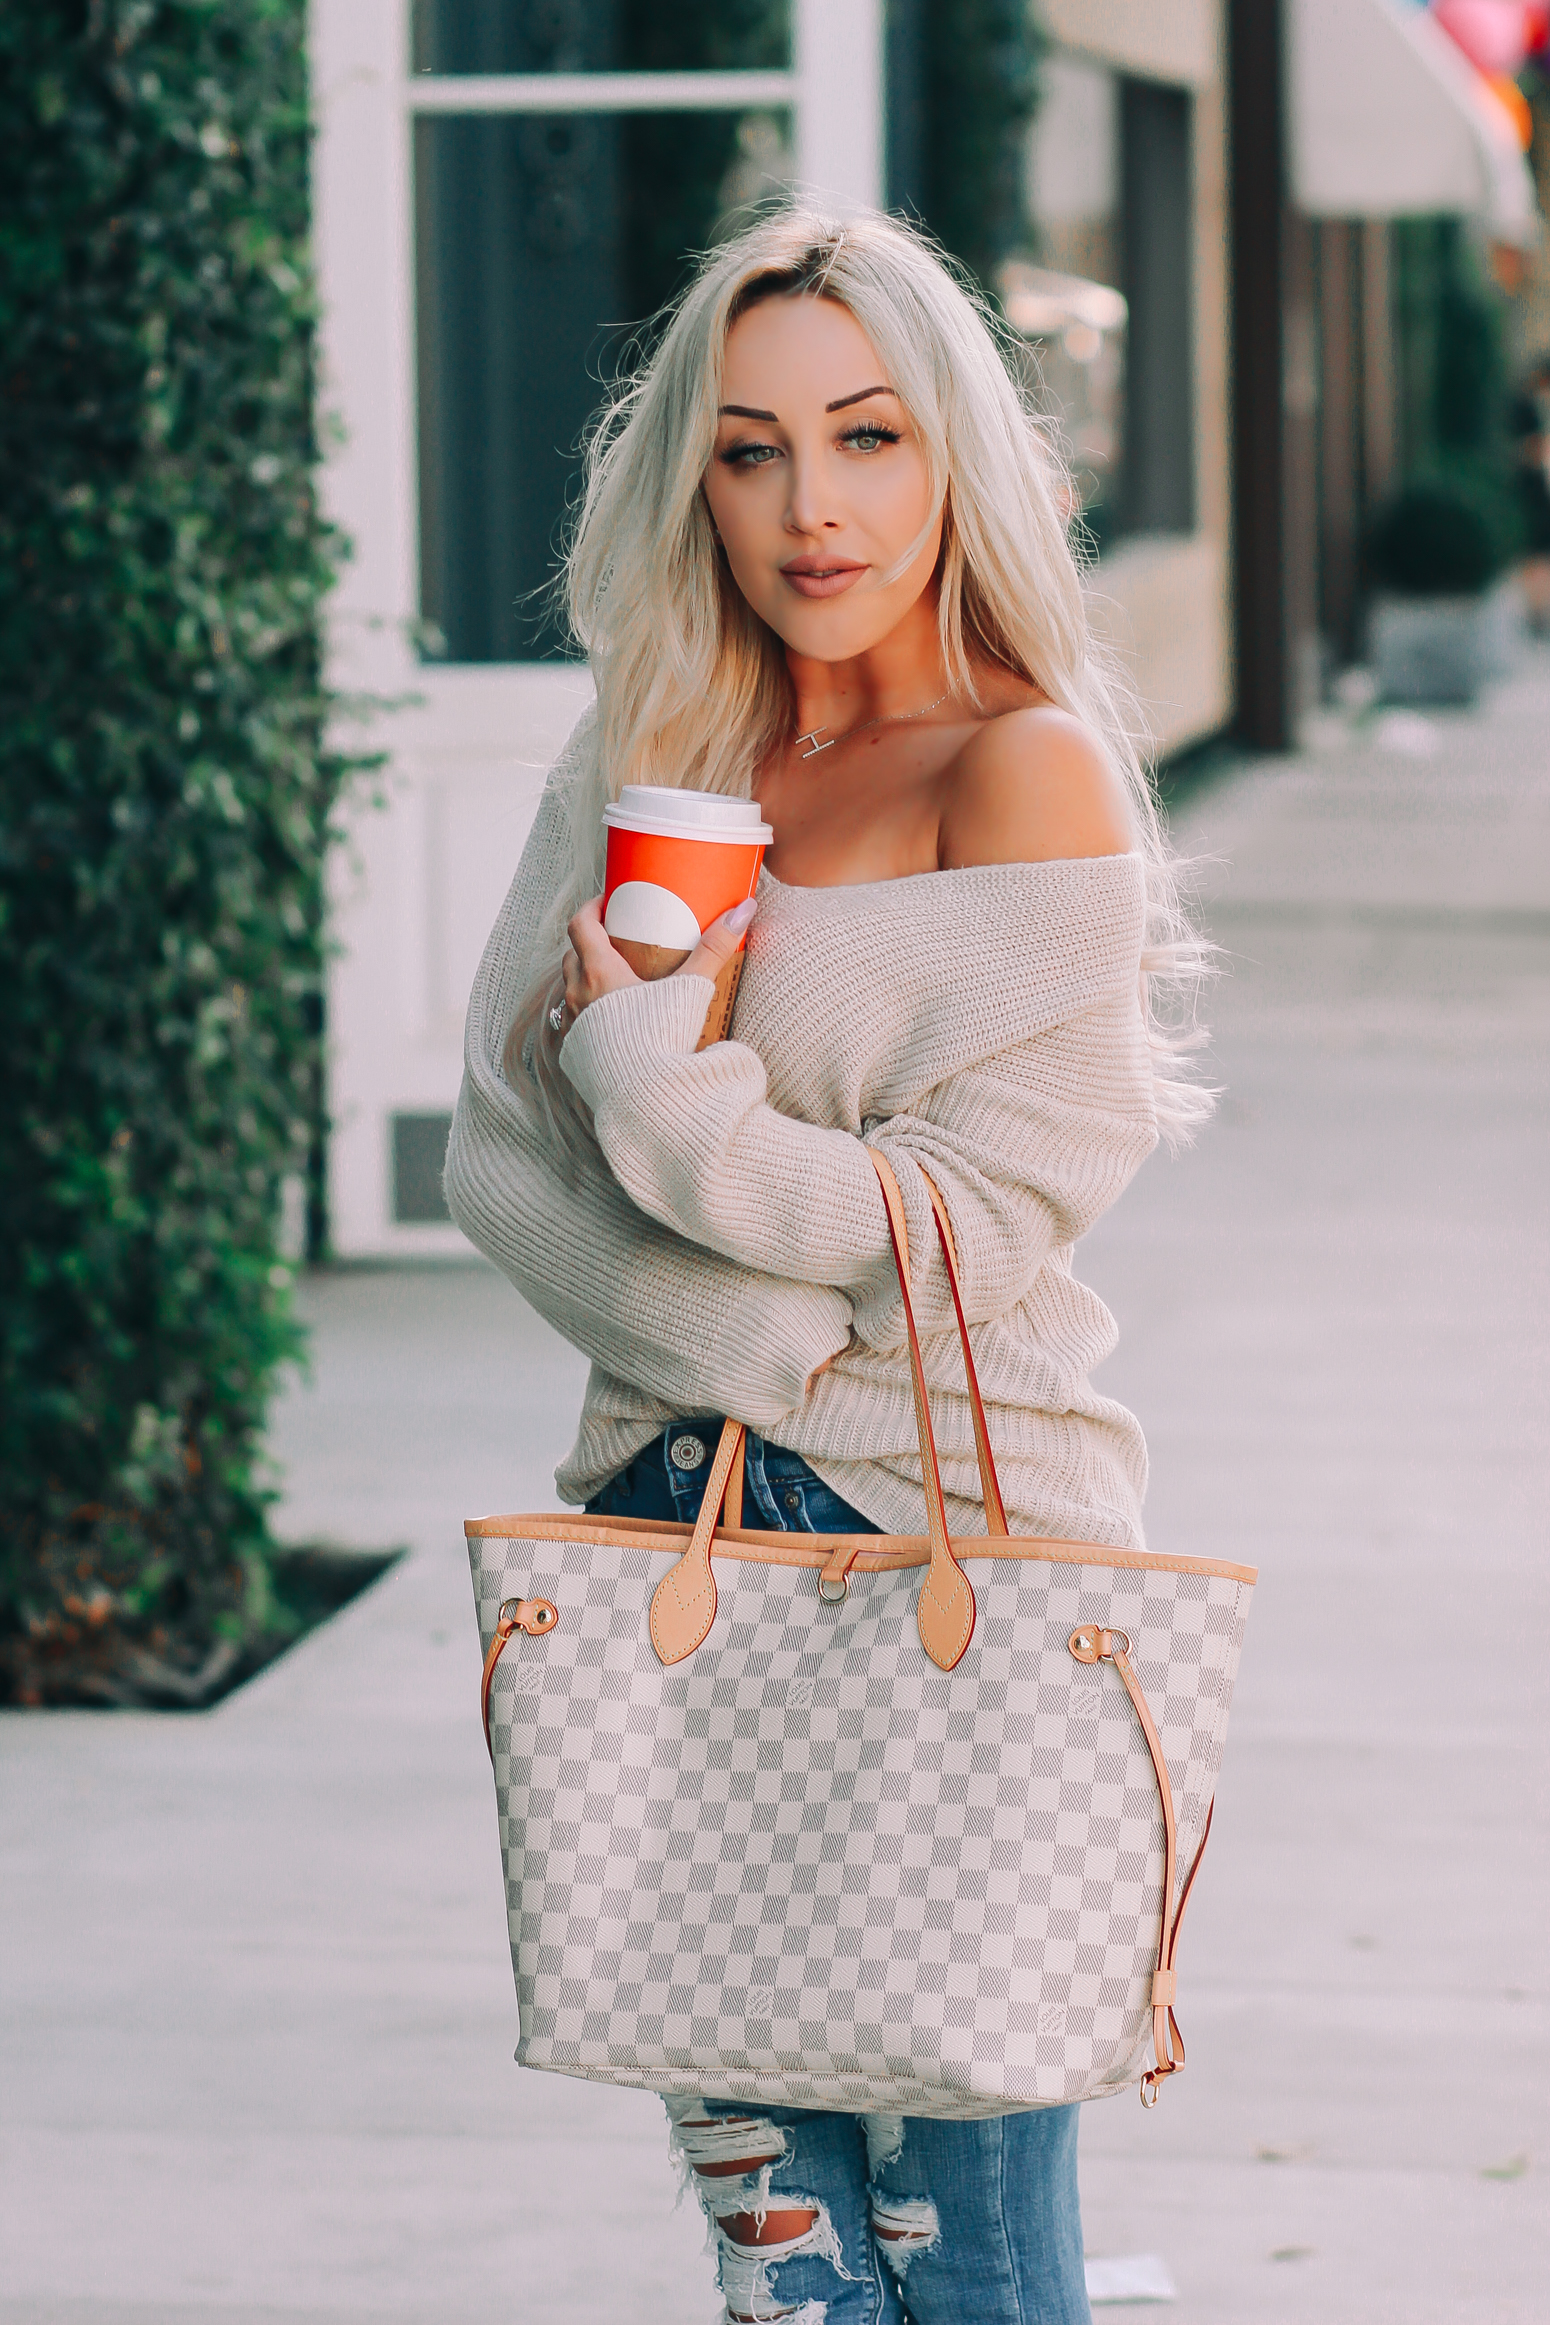 Blondie in the City | Favorite Nordstrom Sweater | Louis Vuitton Neverfull MM | Nude Louboutins